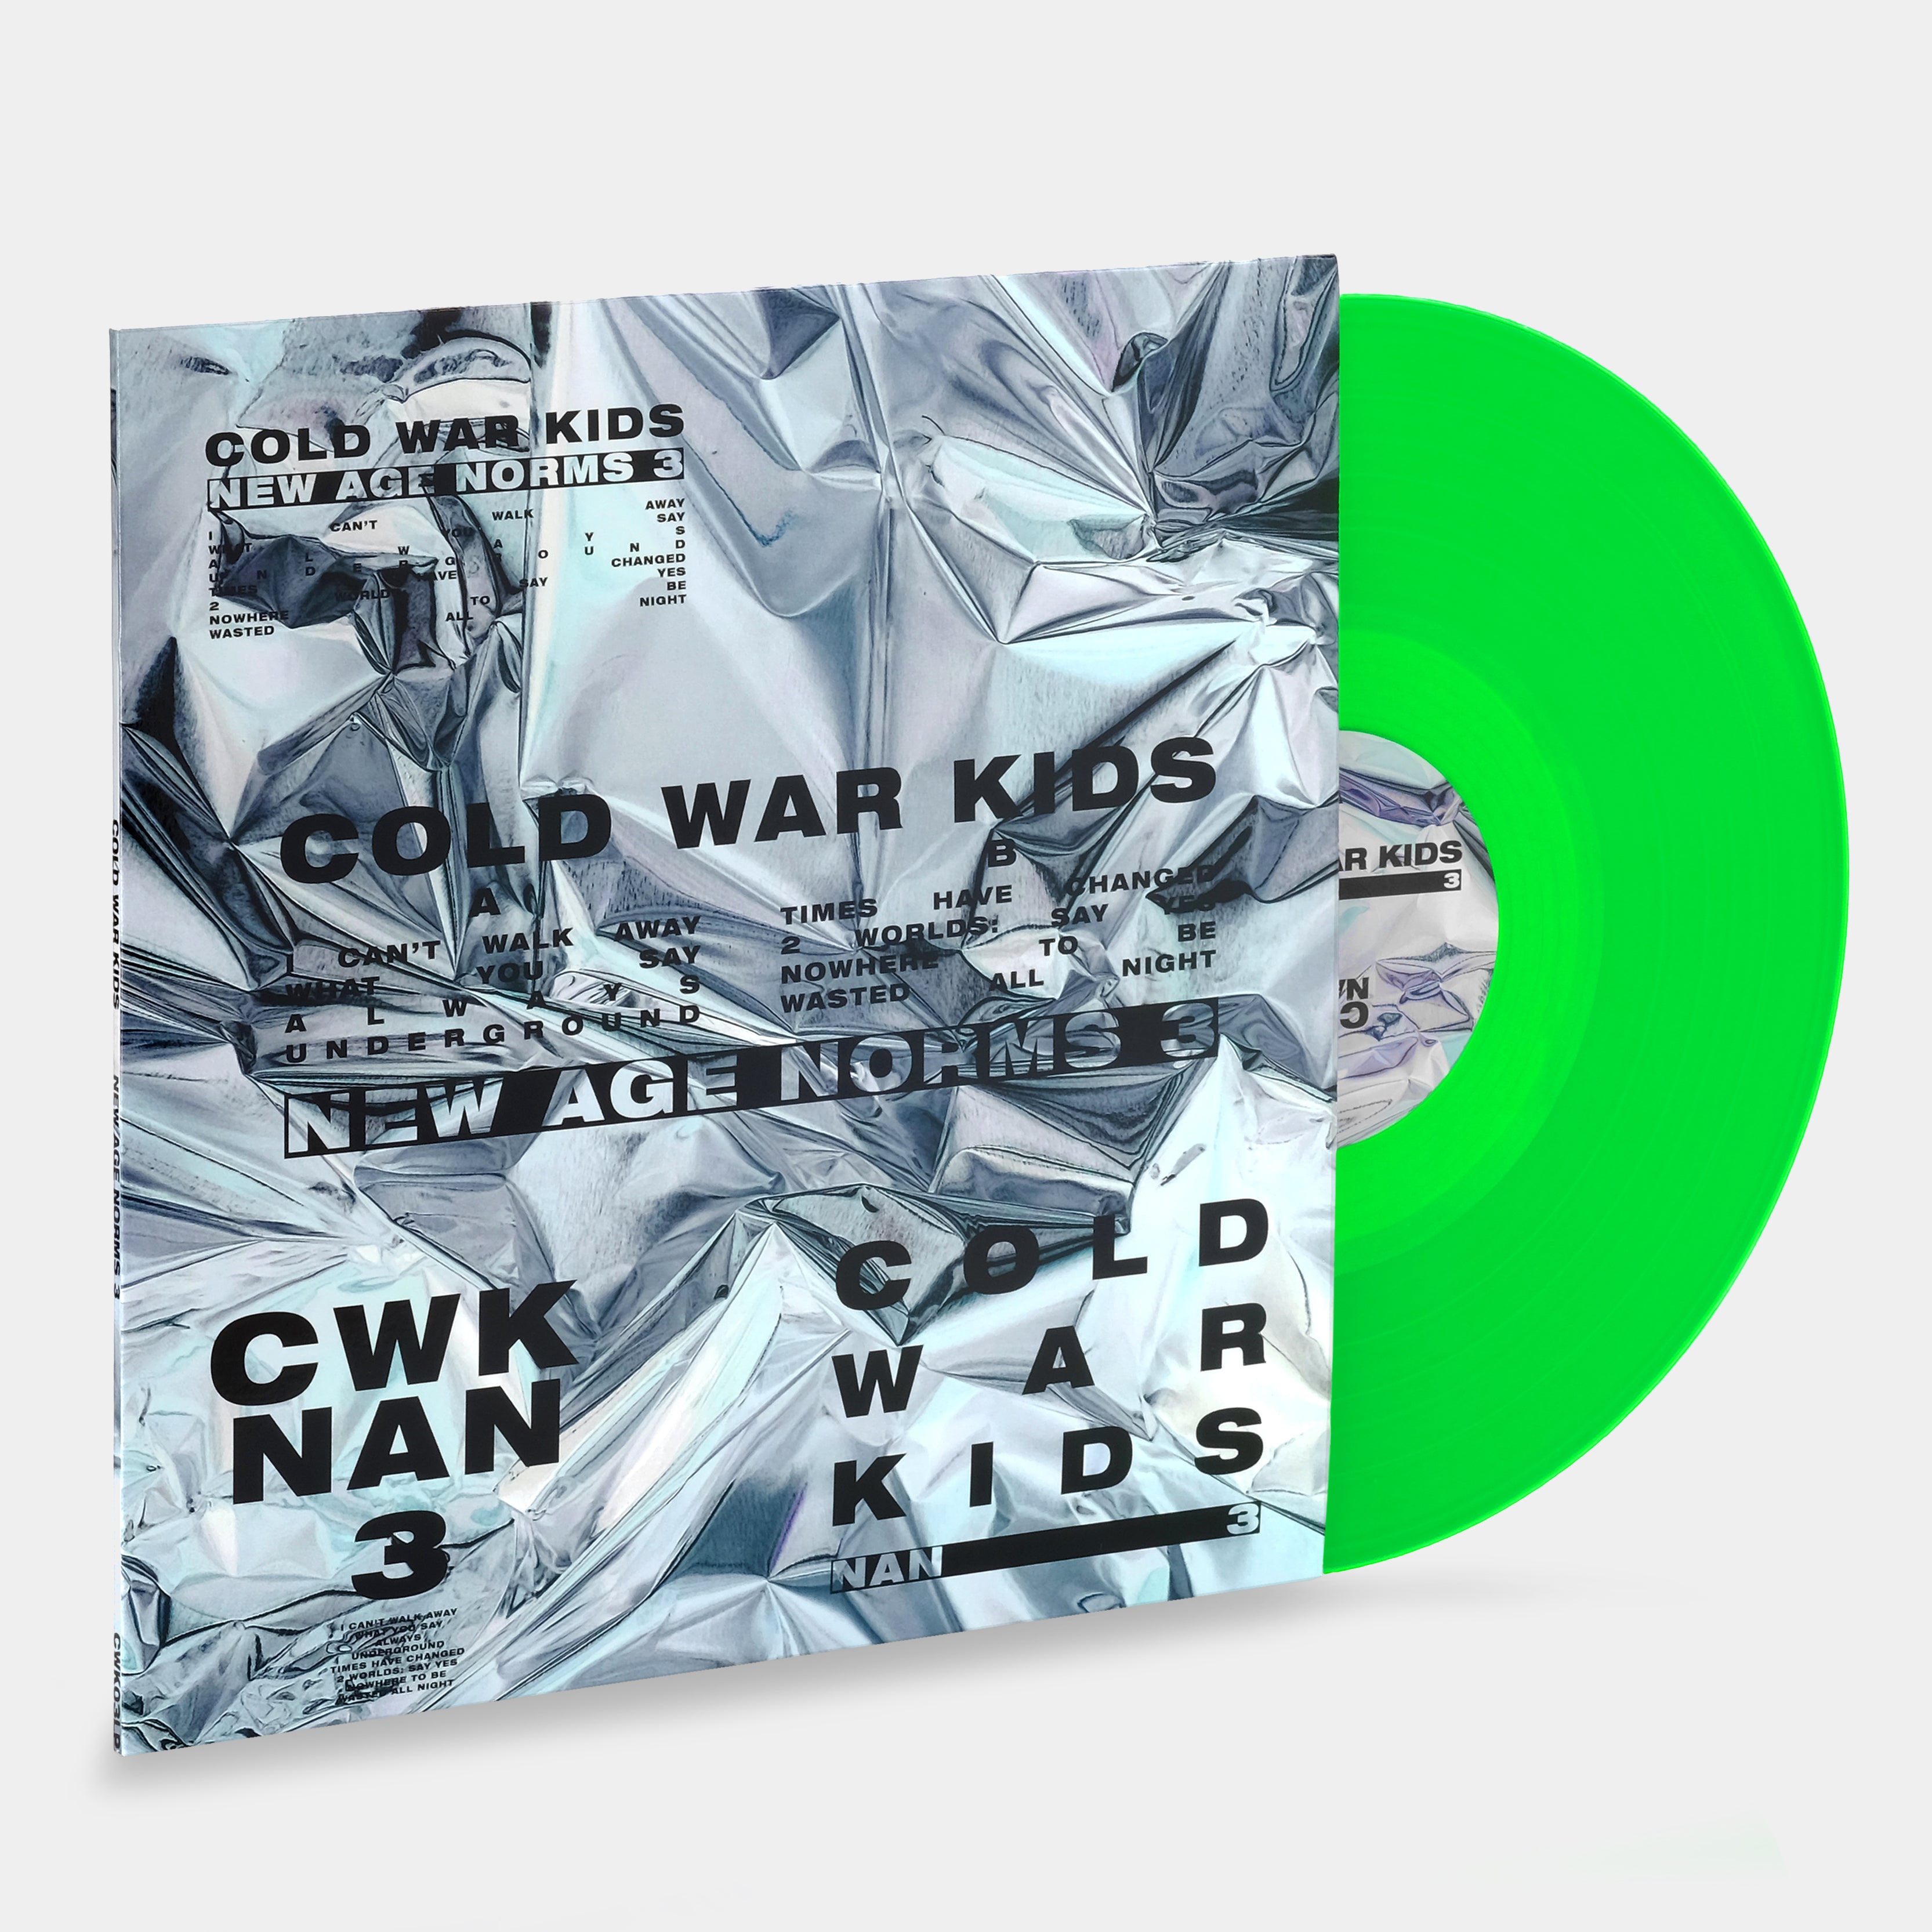 Cold War Kids - New Age Norms 3 (Indie Exclusive) LP Neon Green Vinyl Record